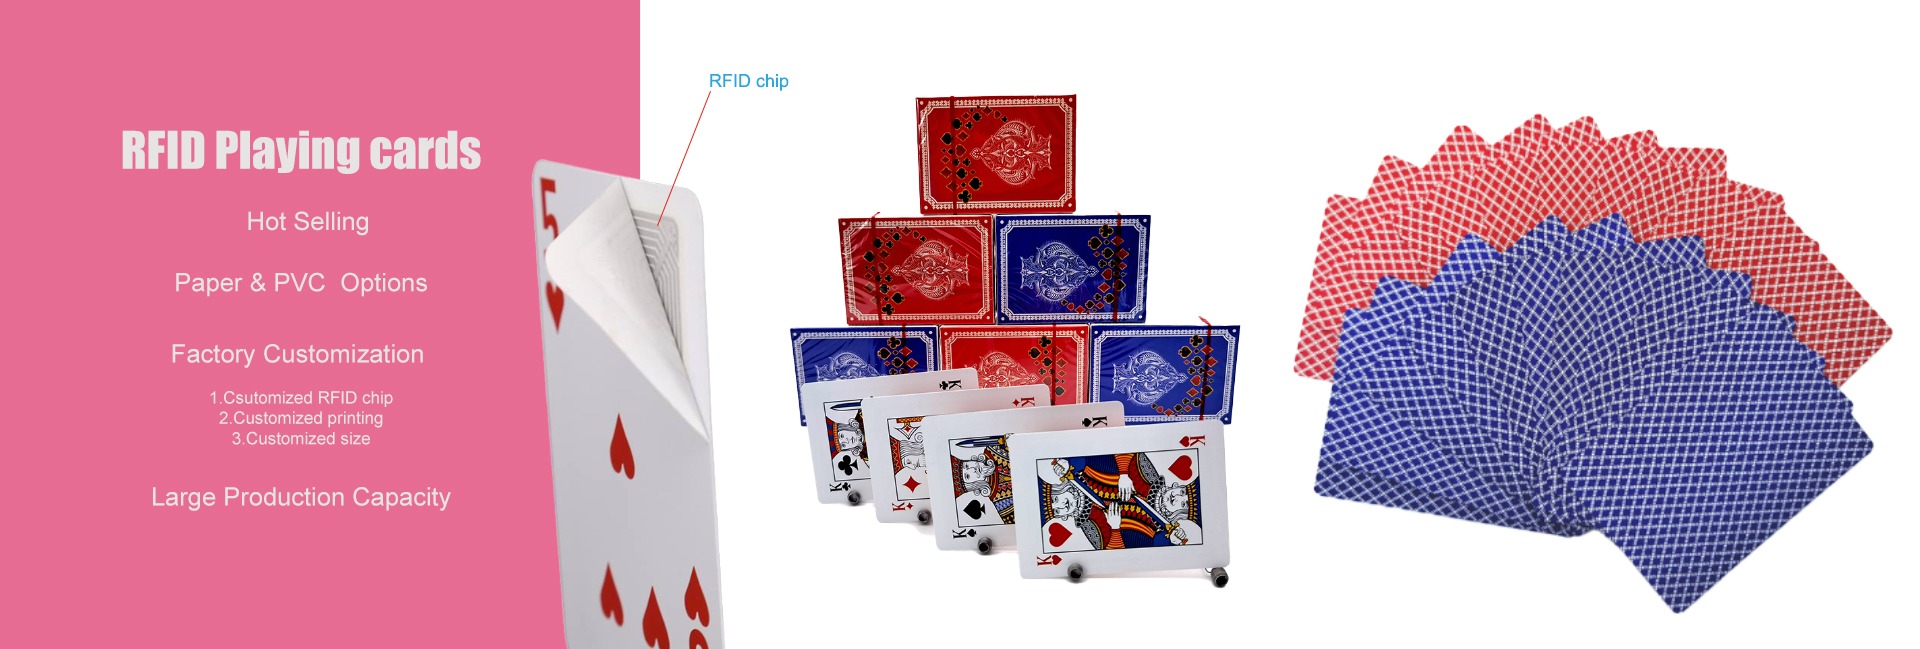 RFID PLAYING CARDS